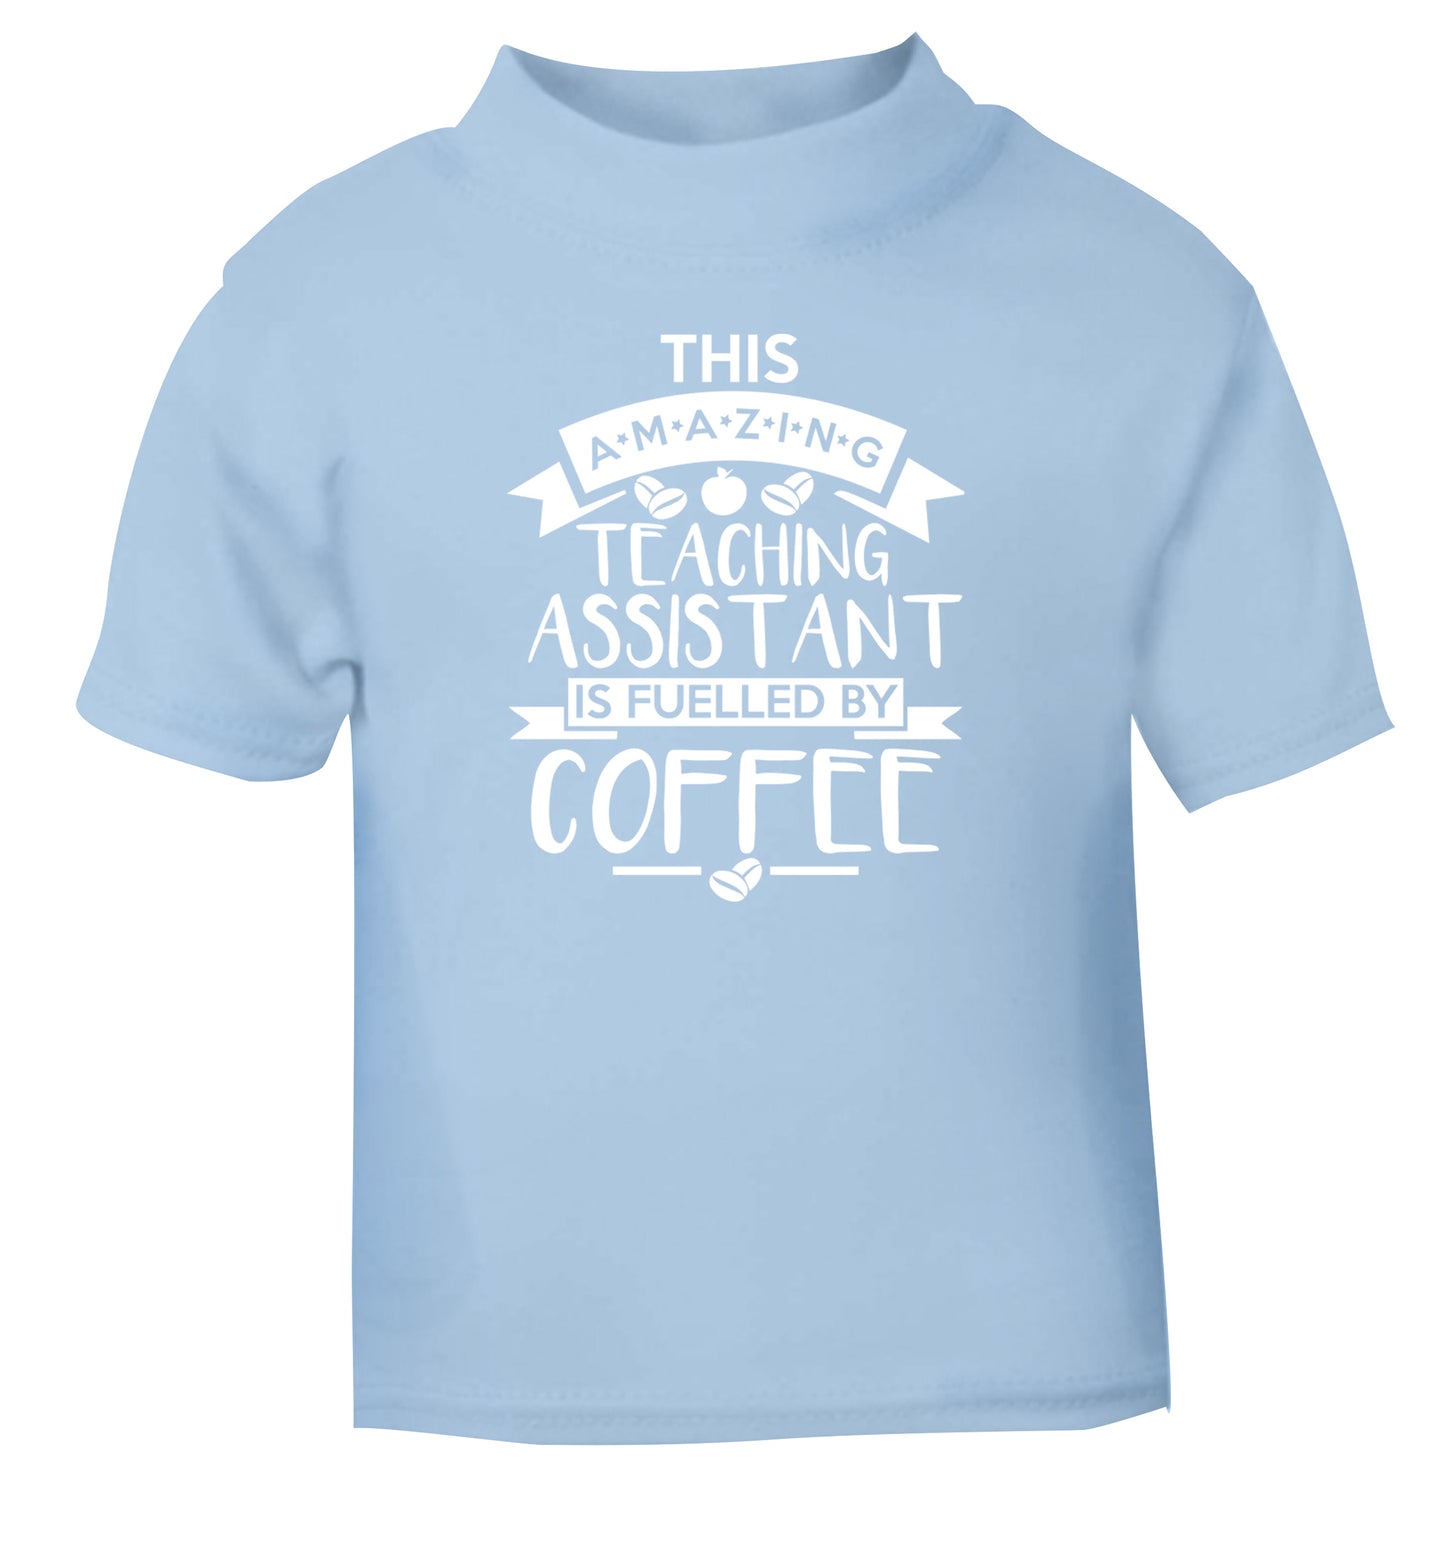 This amazing teaching assistant is fuelled by coffee light blue Baby Toddler Tshirt 2 Years